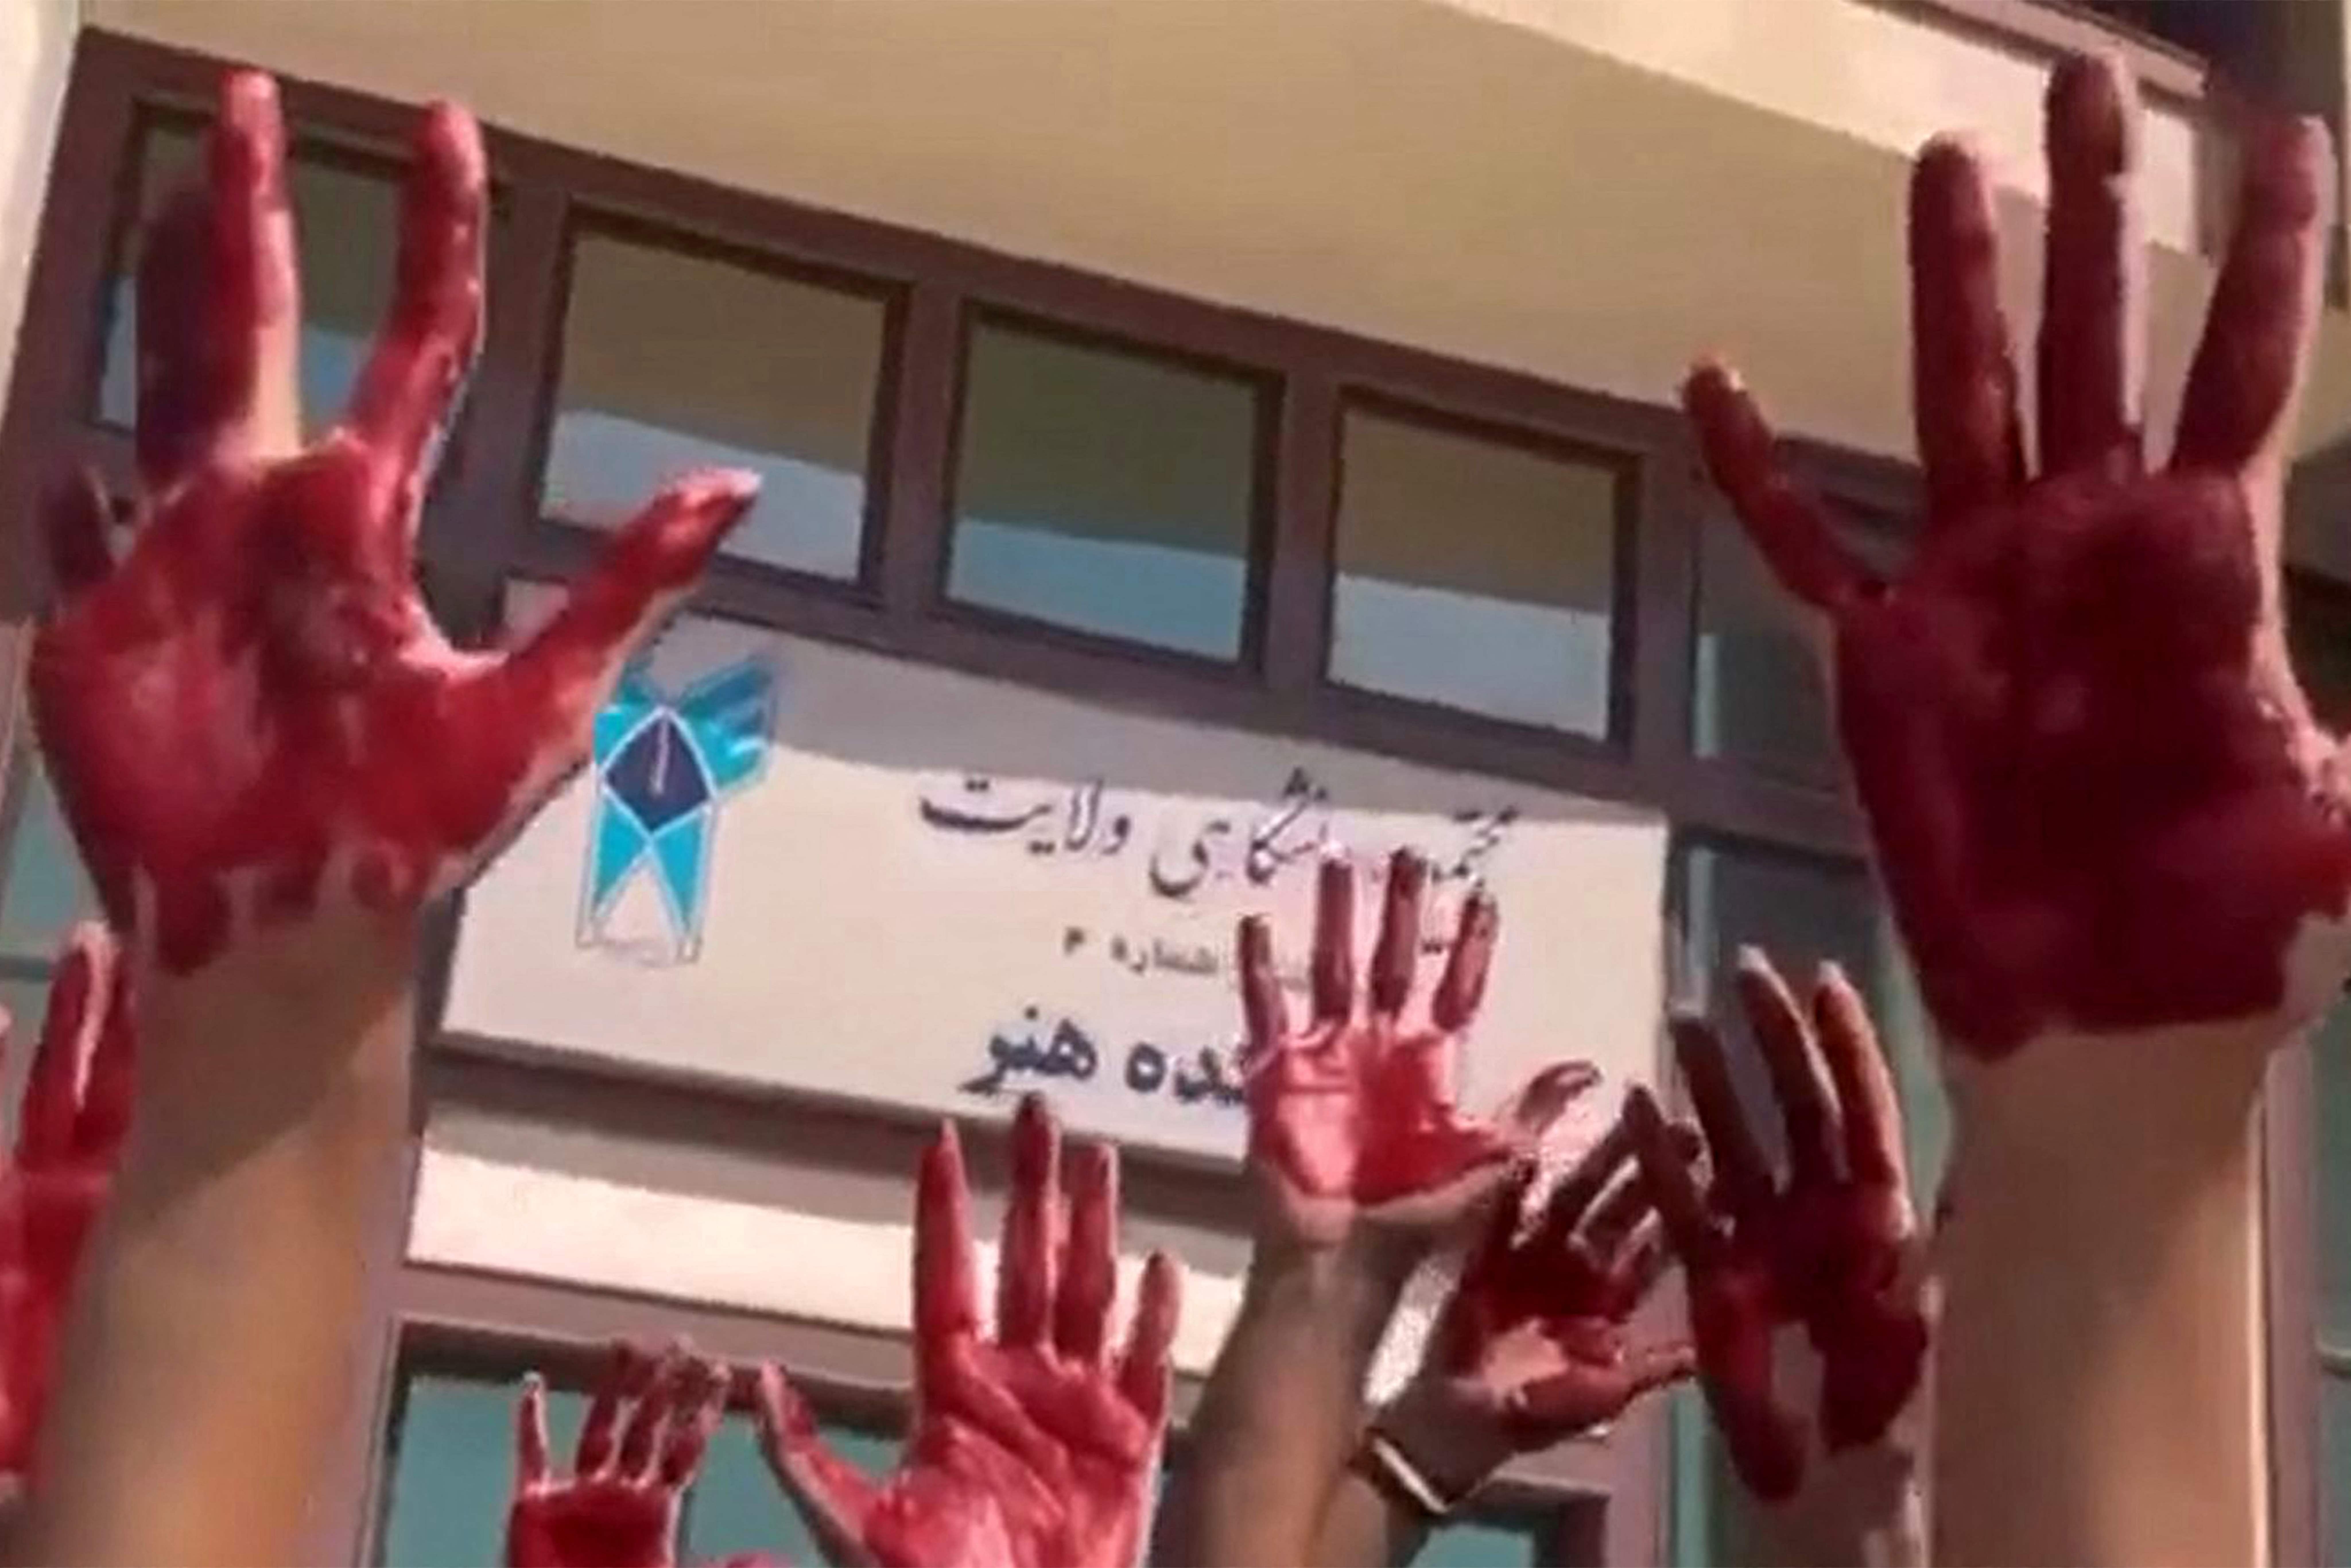 Iranian students from the Faculty of Arts at Tehran’s Azad University participate in a protest with their palms covered in red paint